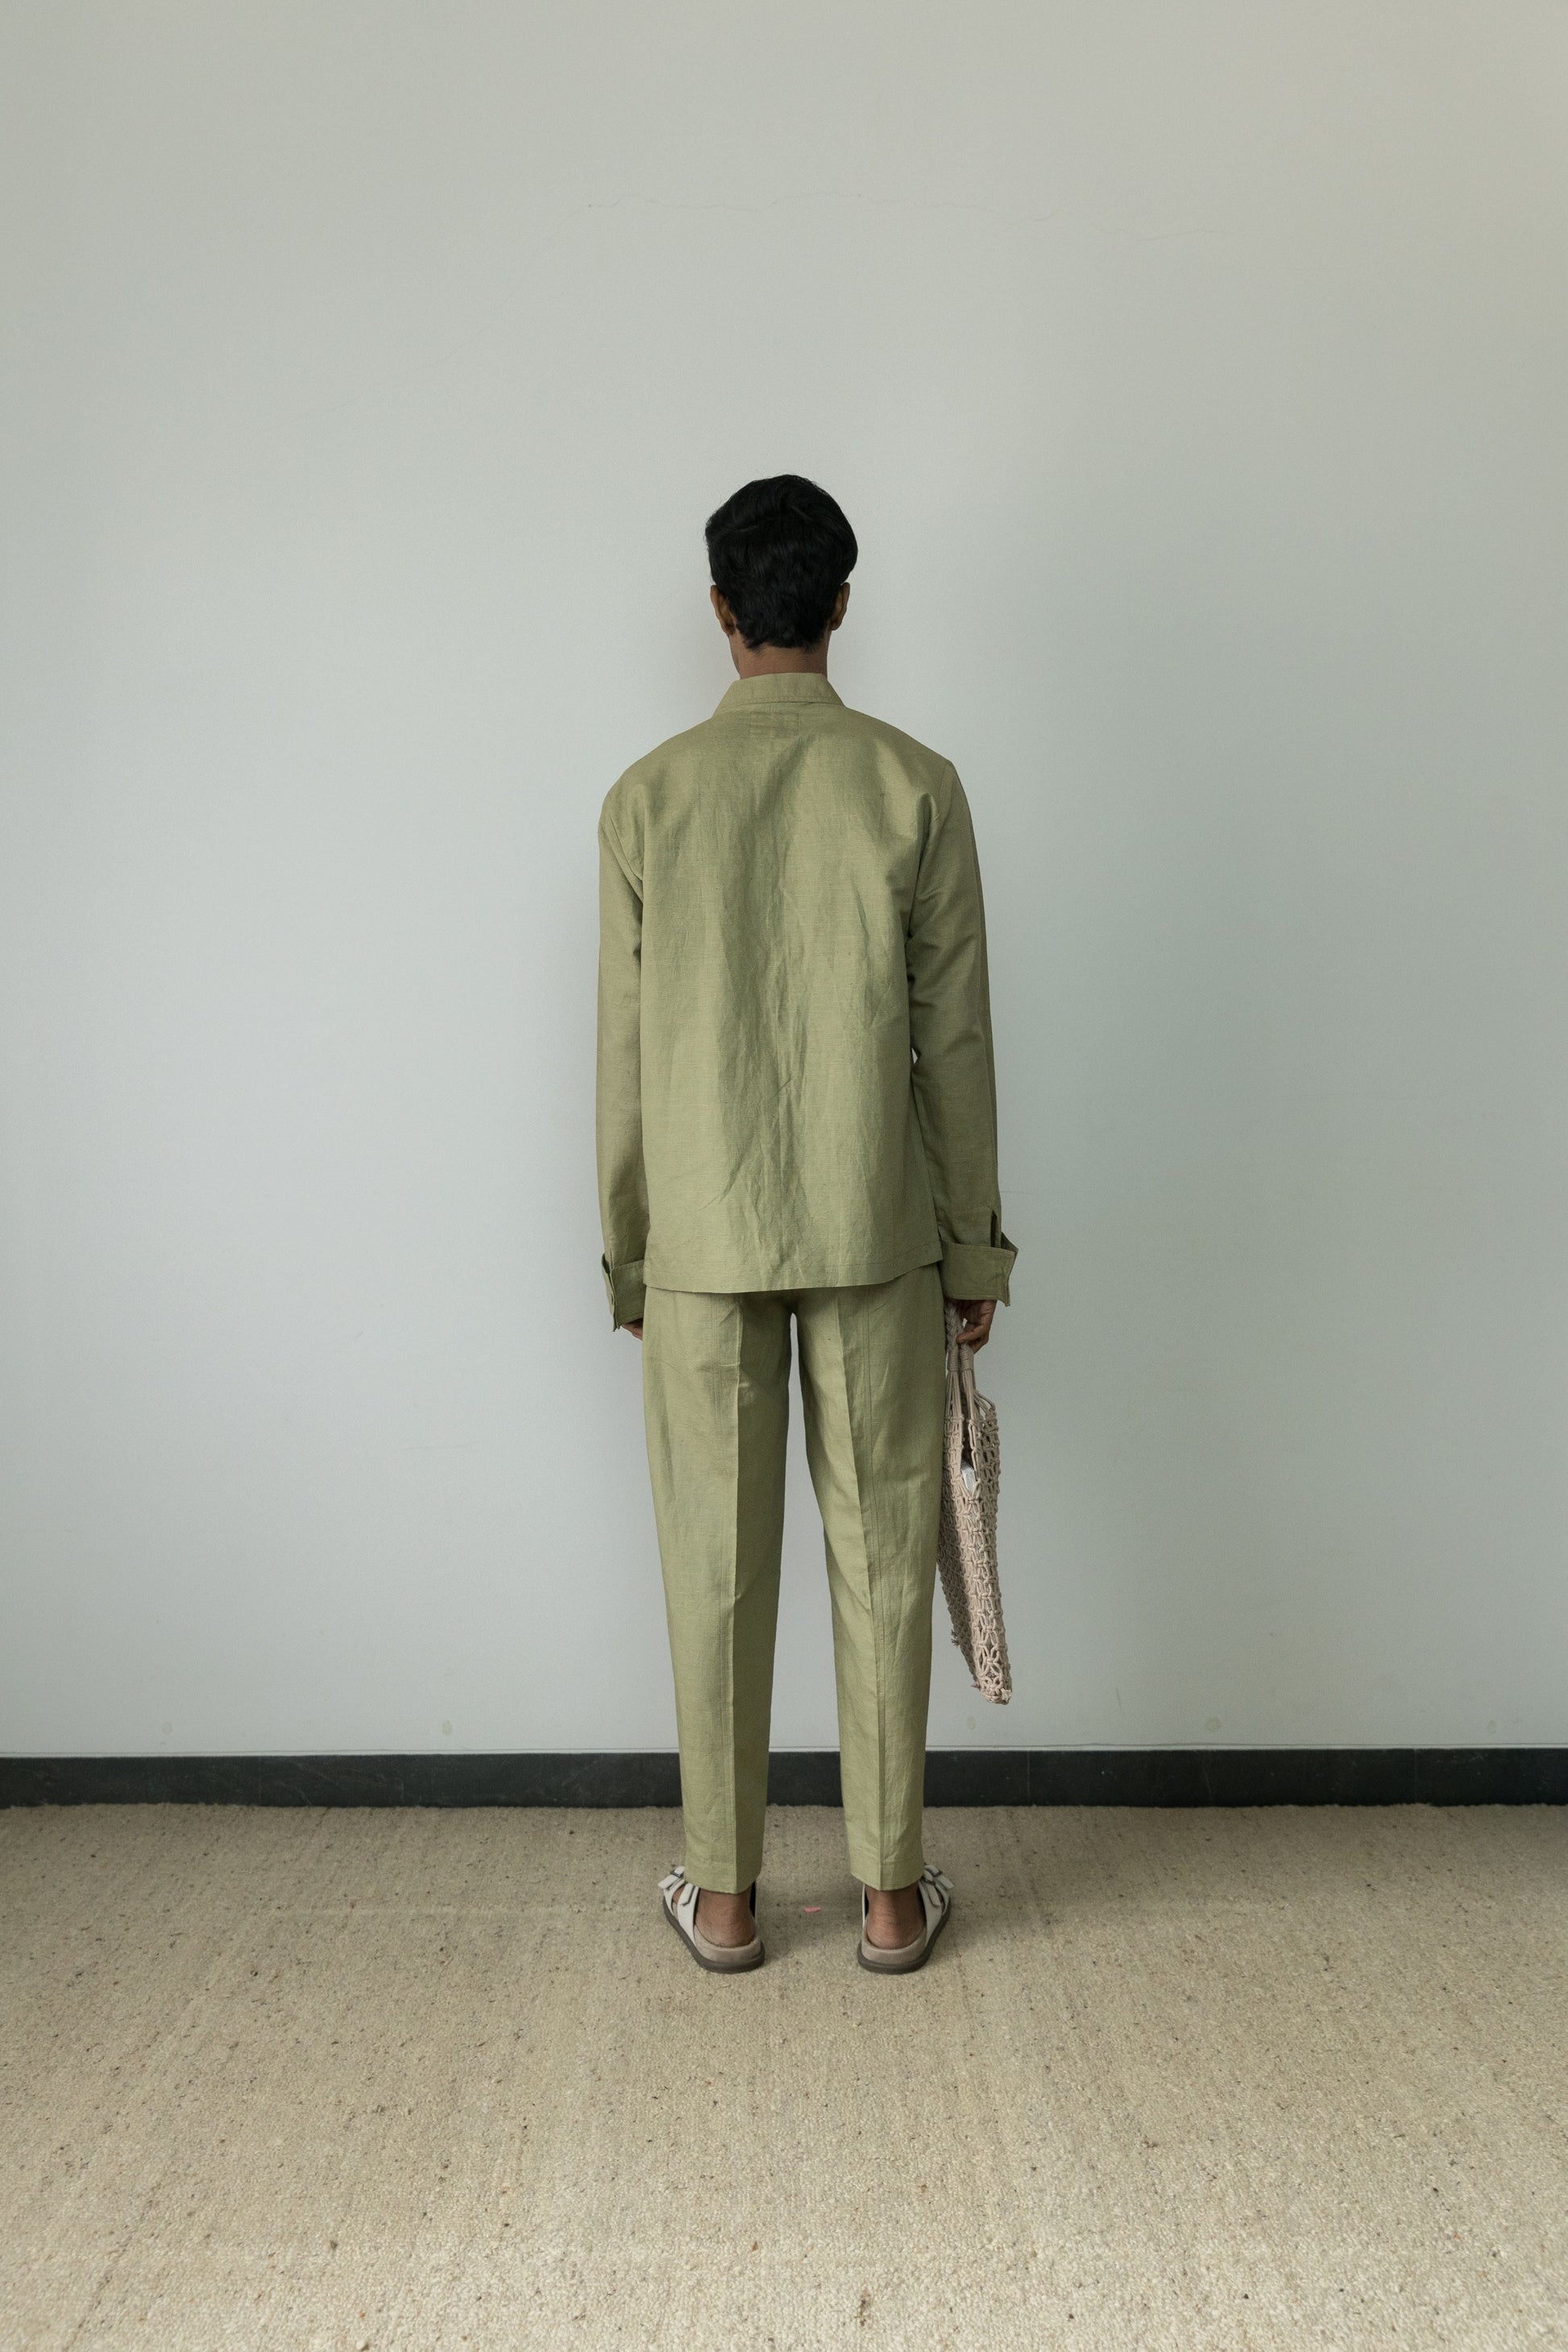 Green Casual Pants at Kamakhyaa by Anushé Pirani. This item is Casual Wear, Cotton, Cotton Hemp, For Him, Green, Handwoven, Hemp, Mens Bottom, Menswear, Pants, Relaxed Fit, Shibumi Collection, Solids